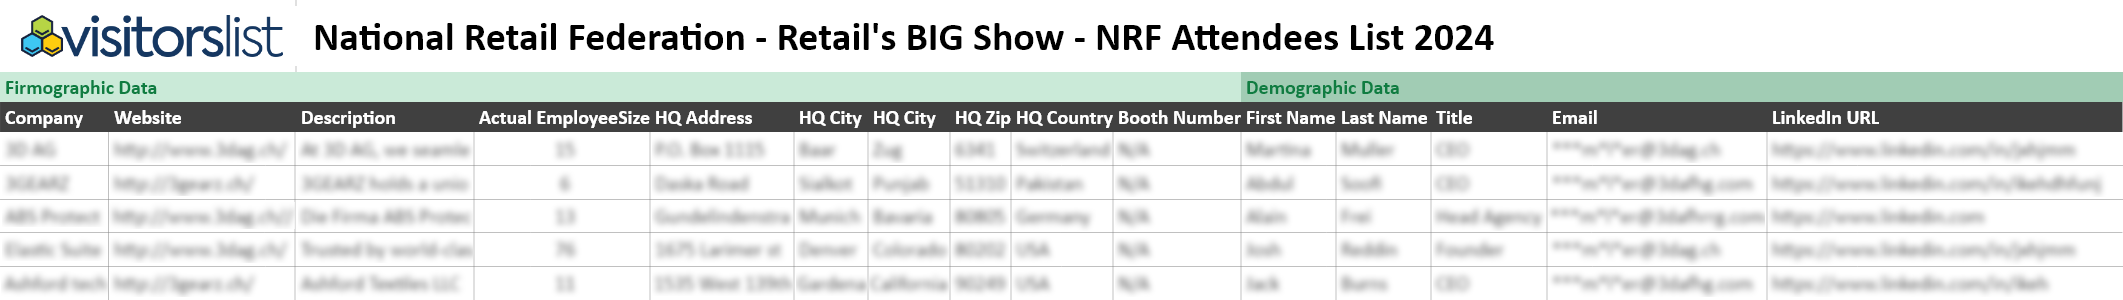 National Retail Federation - Retail's BIG Show - NRF Attendees List 2024